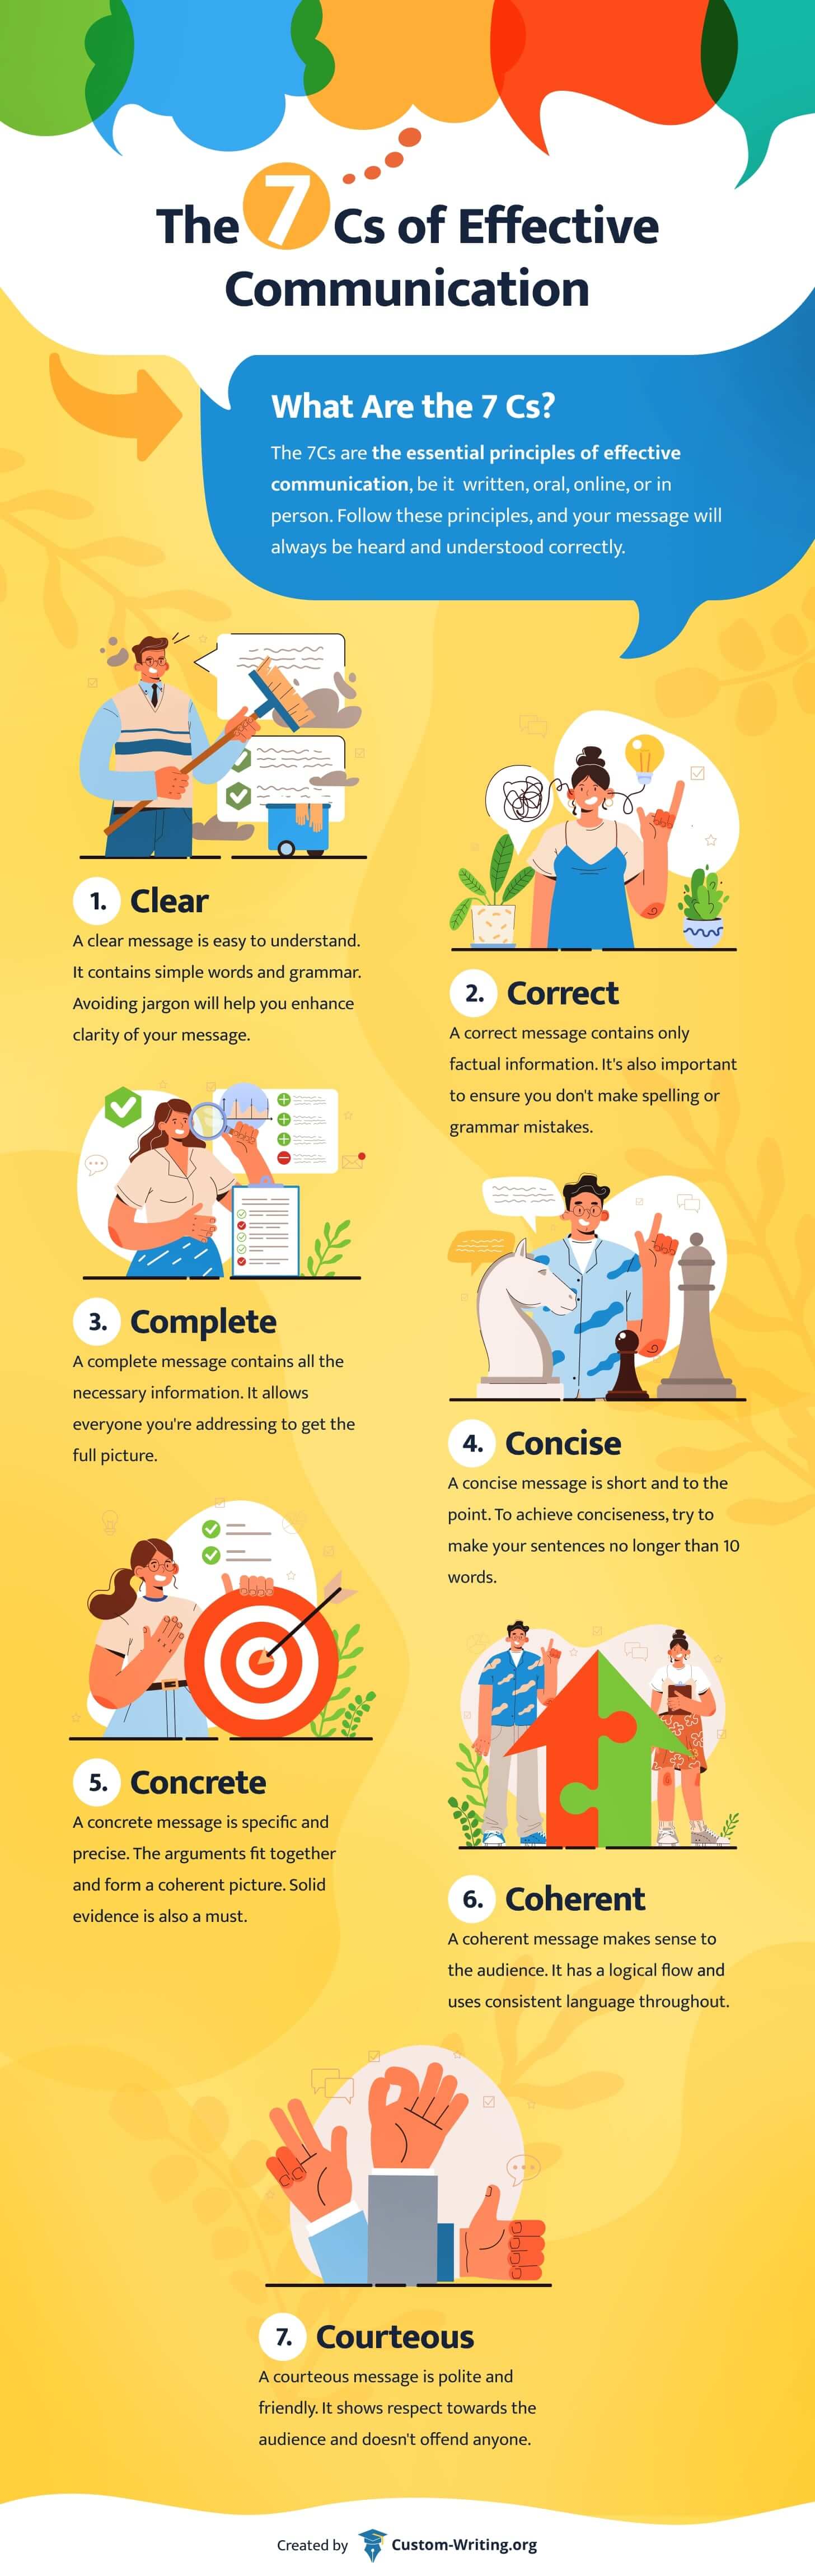 The infographic enumerates the 7Cs of communication.